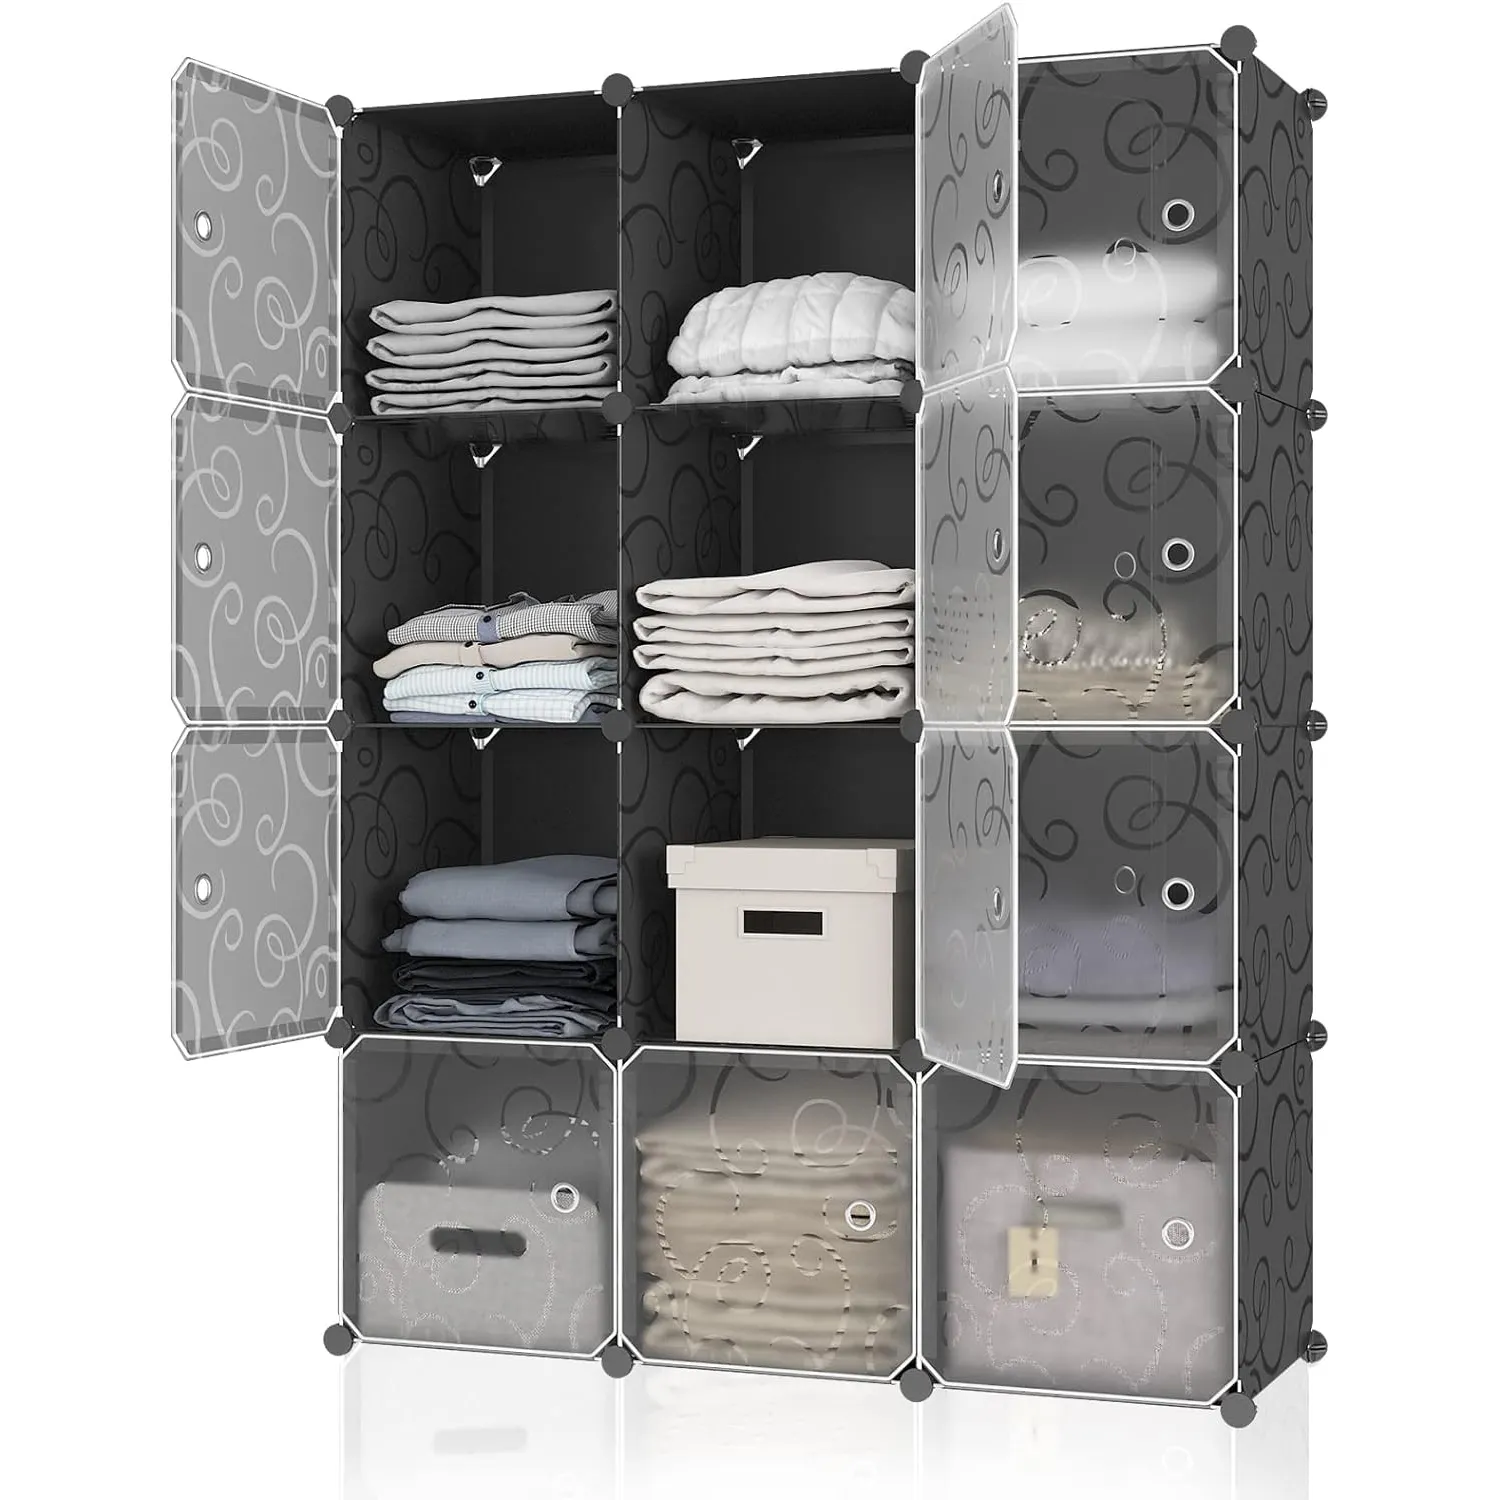 Multi-tier Children's Wardrobe Free Safe for Storing Baby Clothes Plastic Snack Cabinet, Large Baby Clothing Storage Cabinet